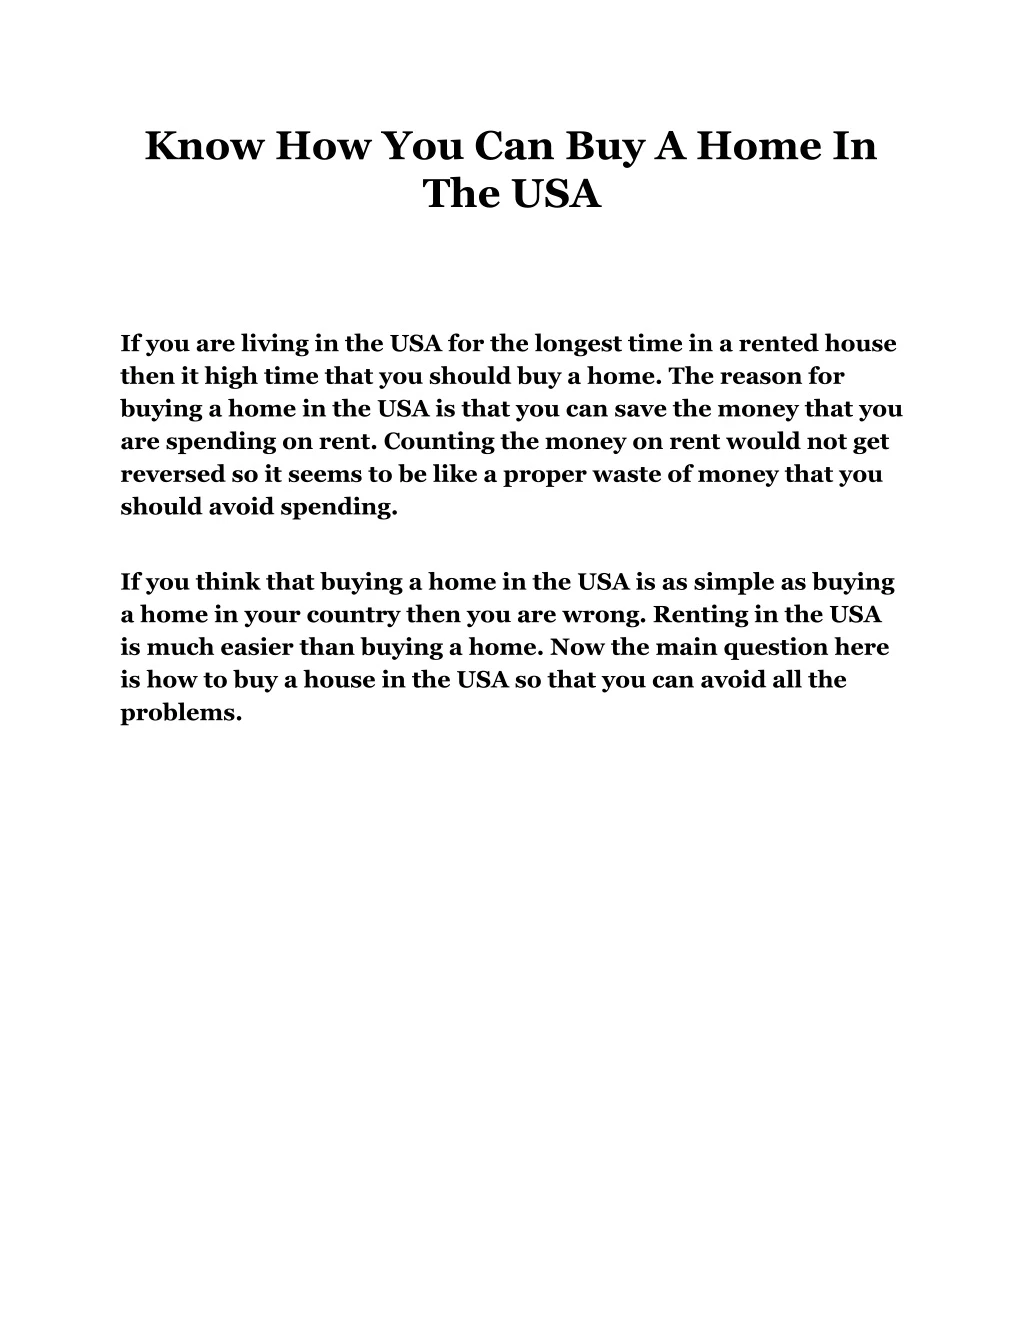 know how you can buy a home in the usa